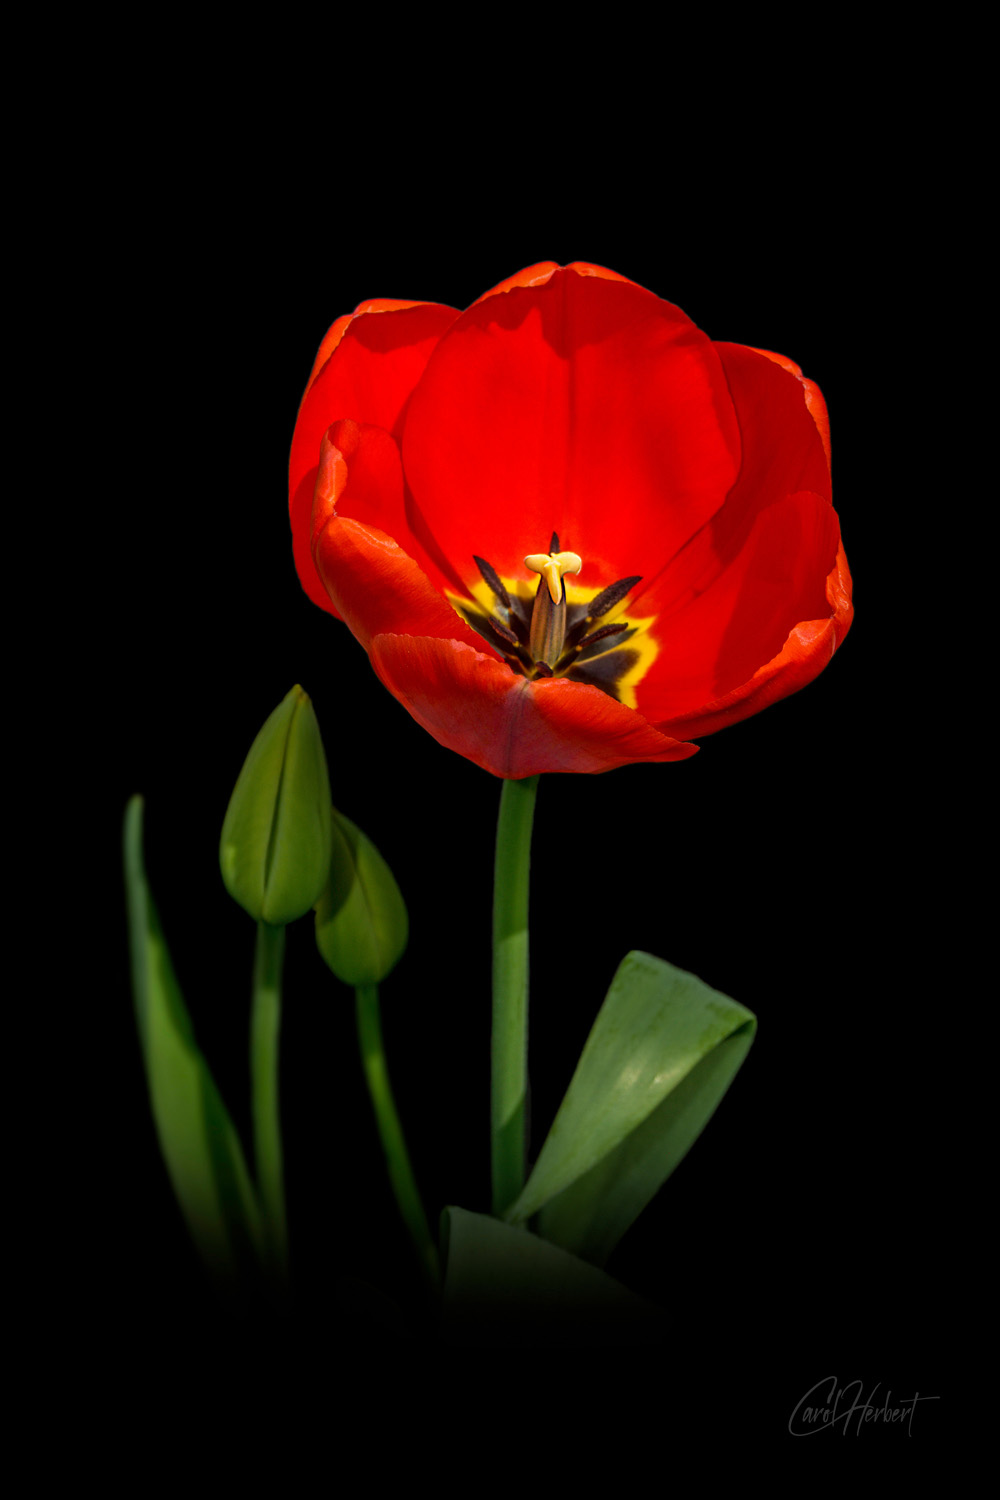 A single red tulip on a black background